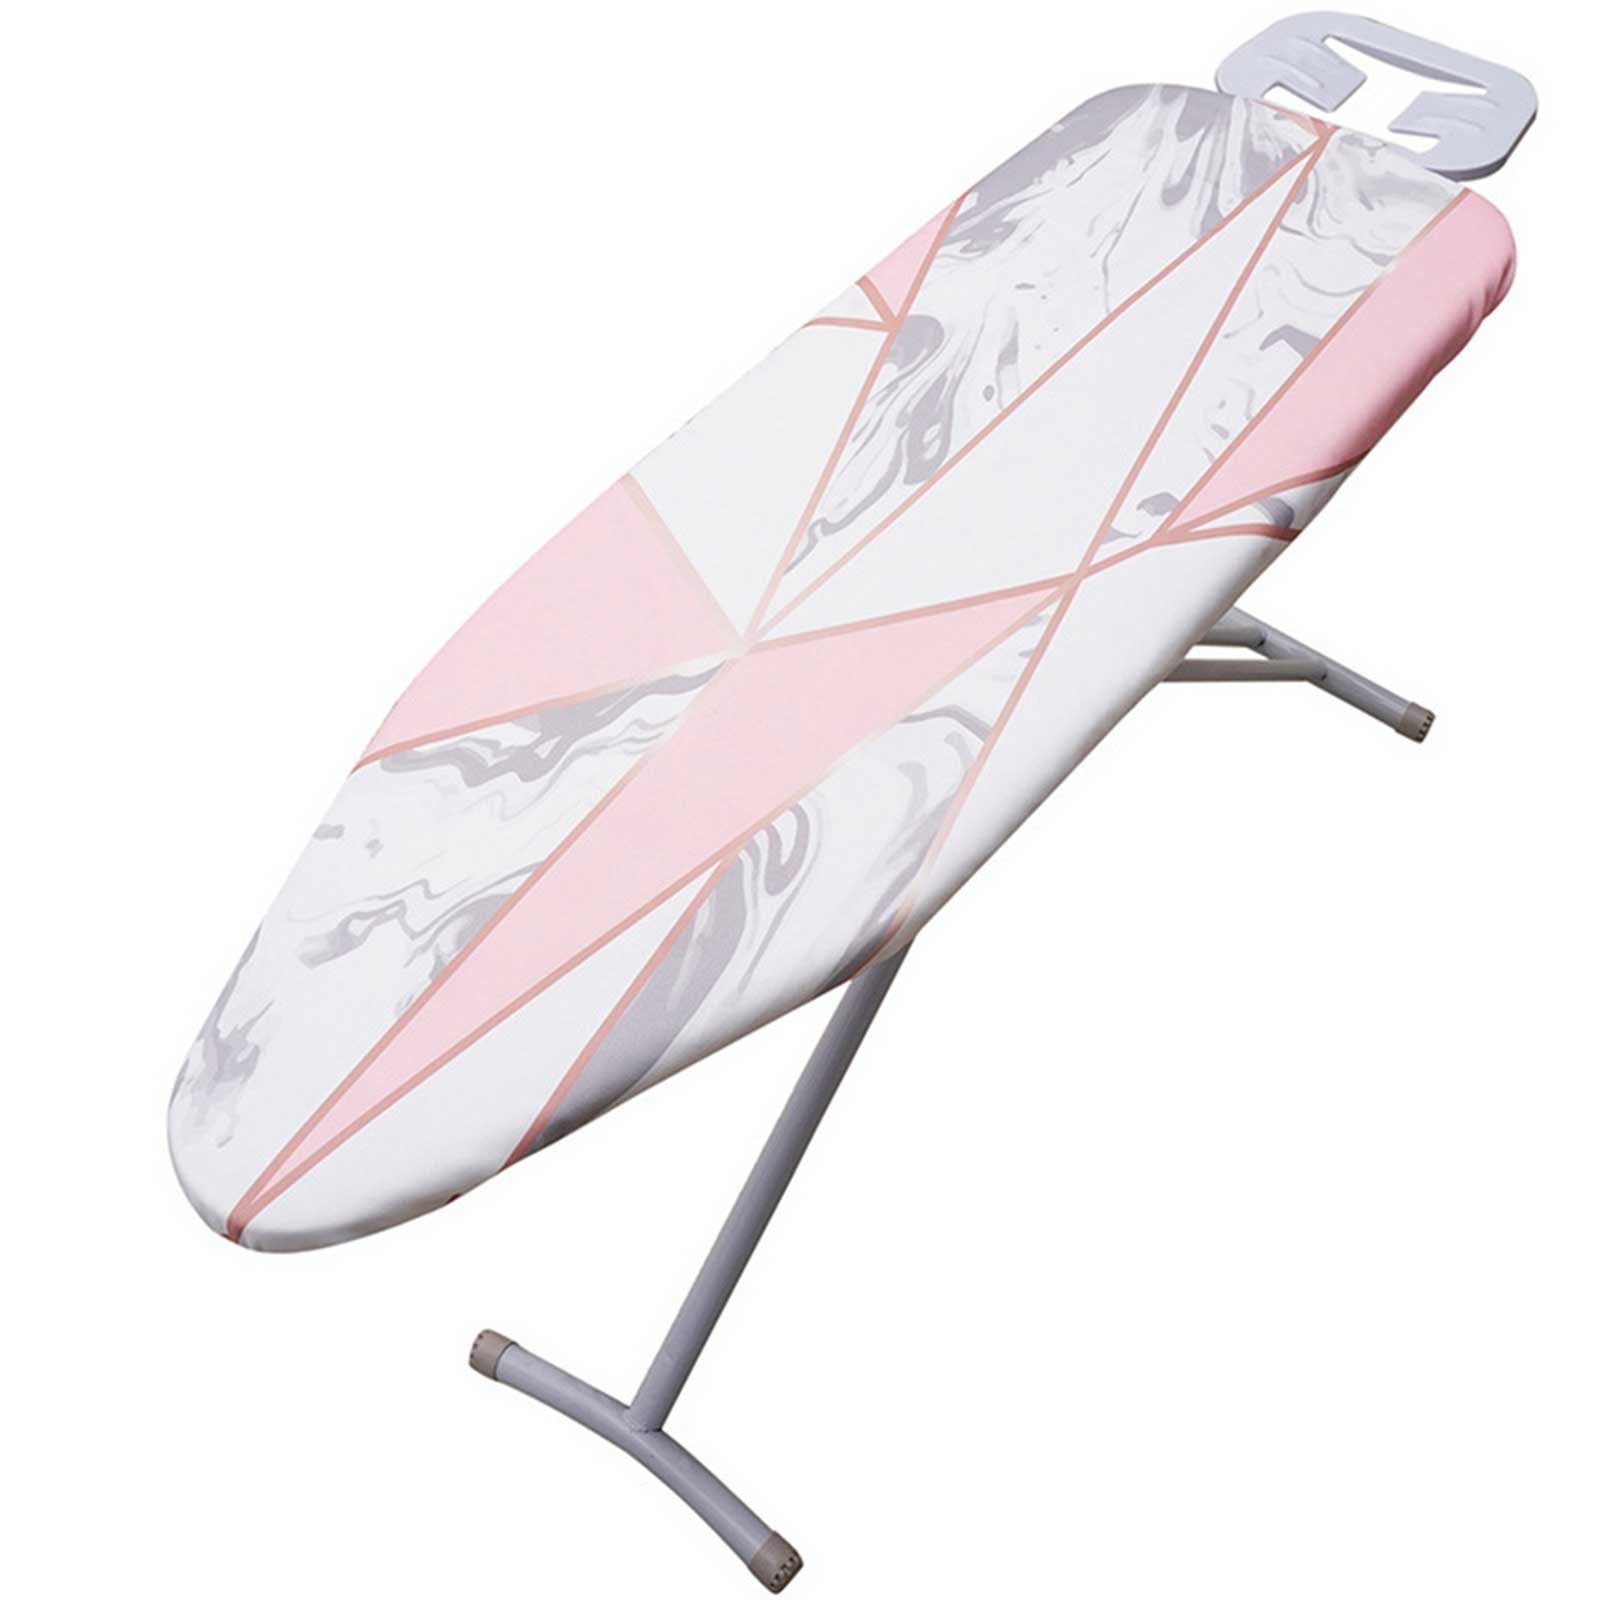 AIM Cloudbed Ironing Board Cover Scorching Resistance Iron Table Cover Flamingo 